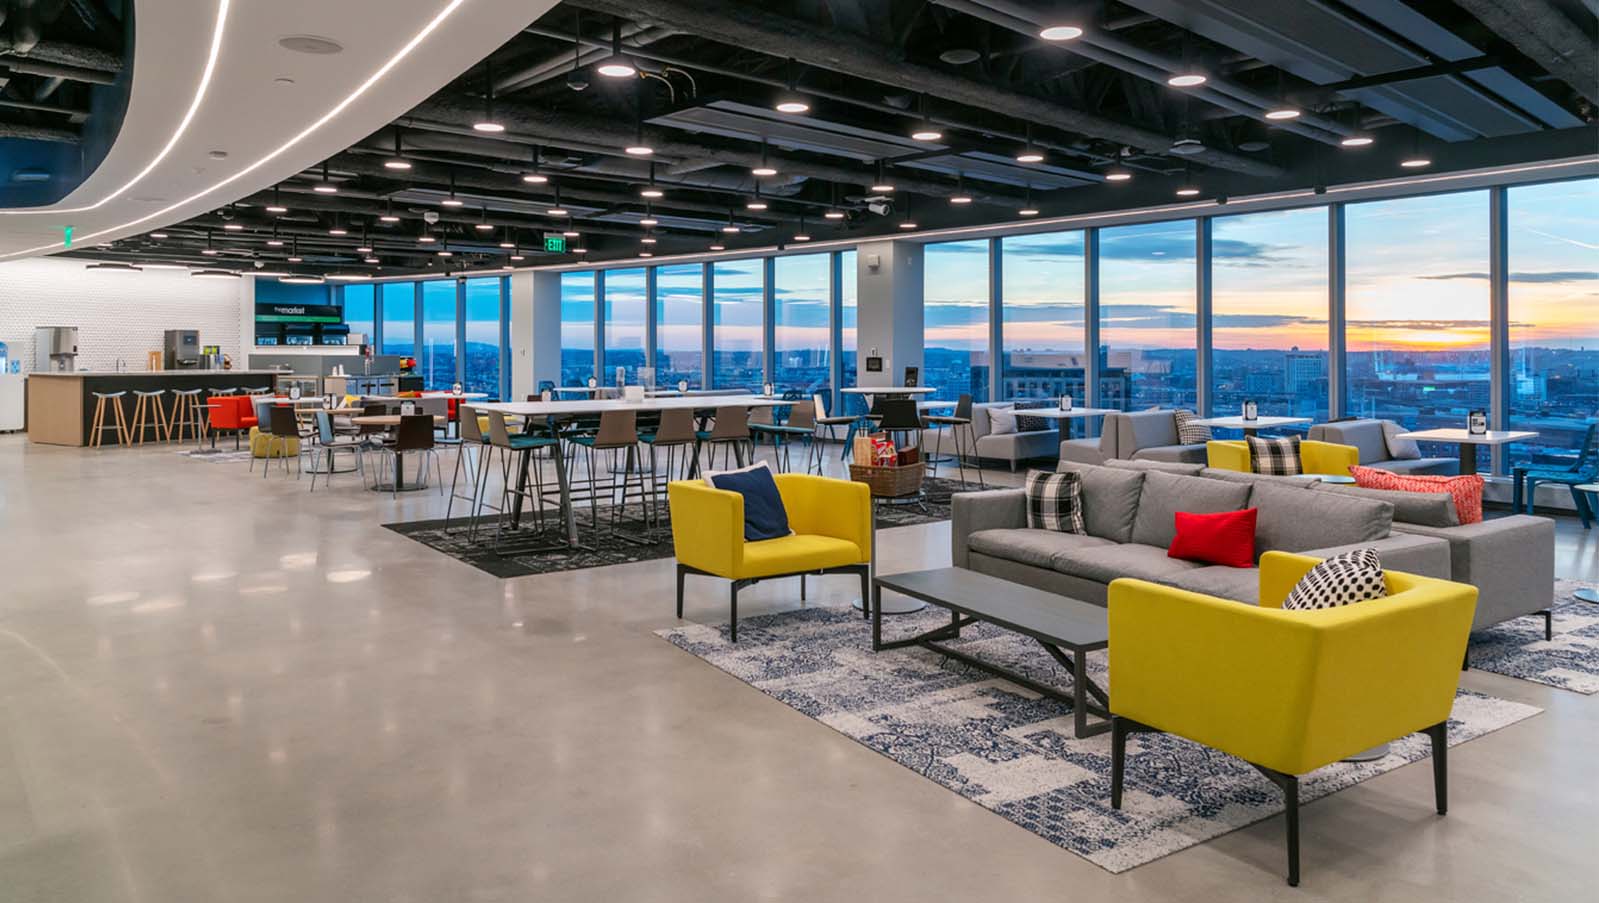 PTC Boston Hq, cafe/lounge area with overlook of the city